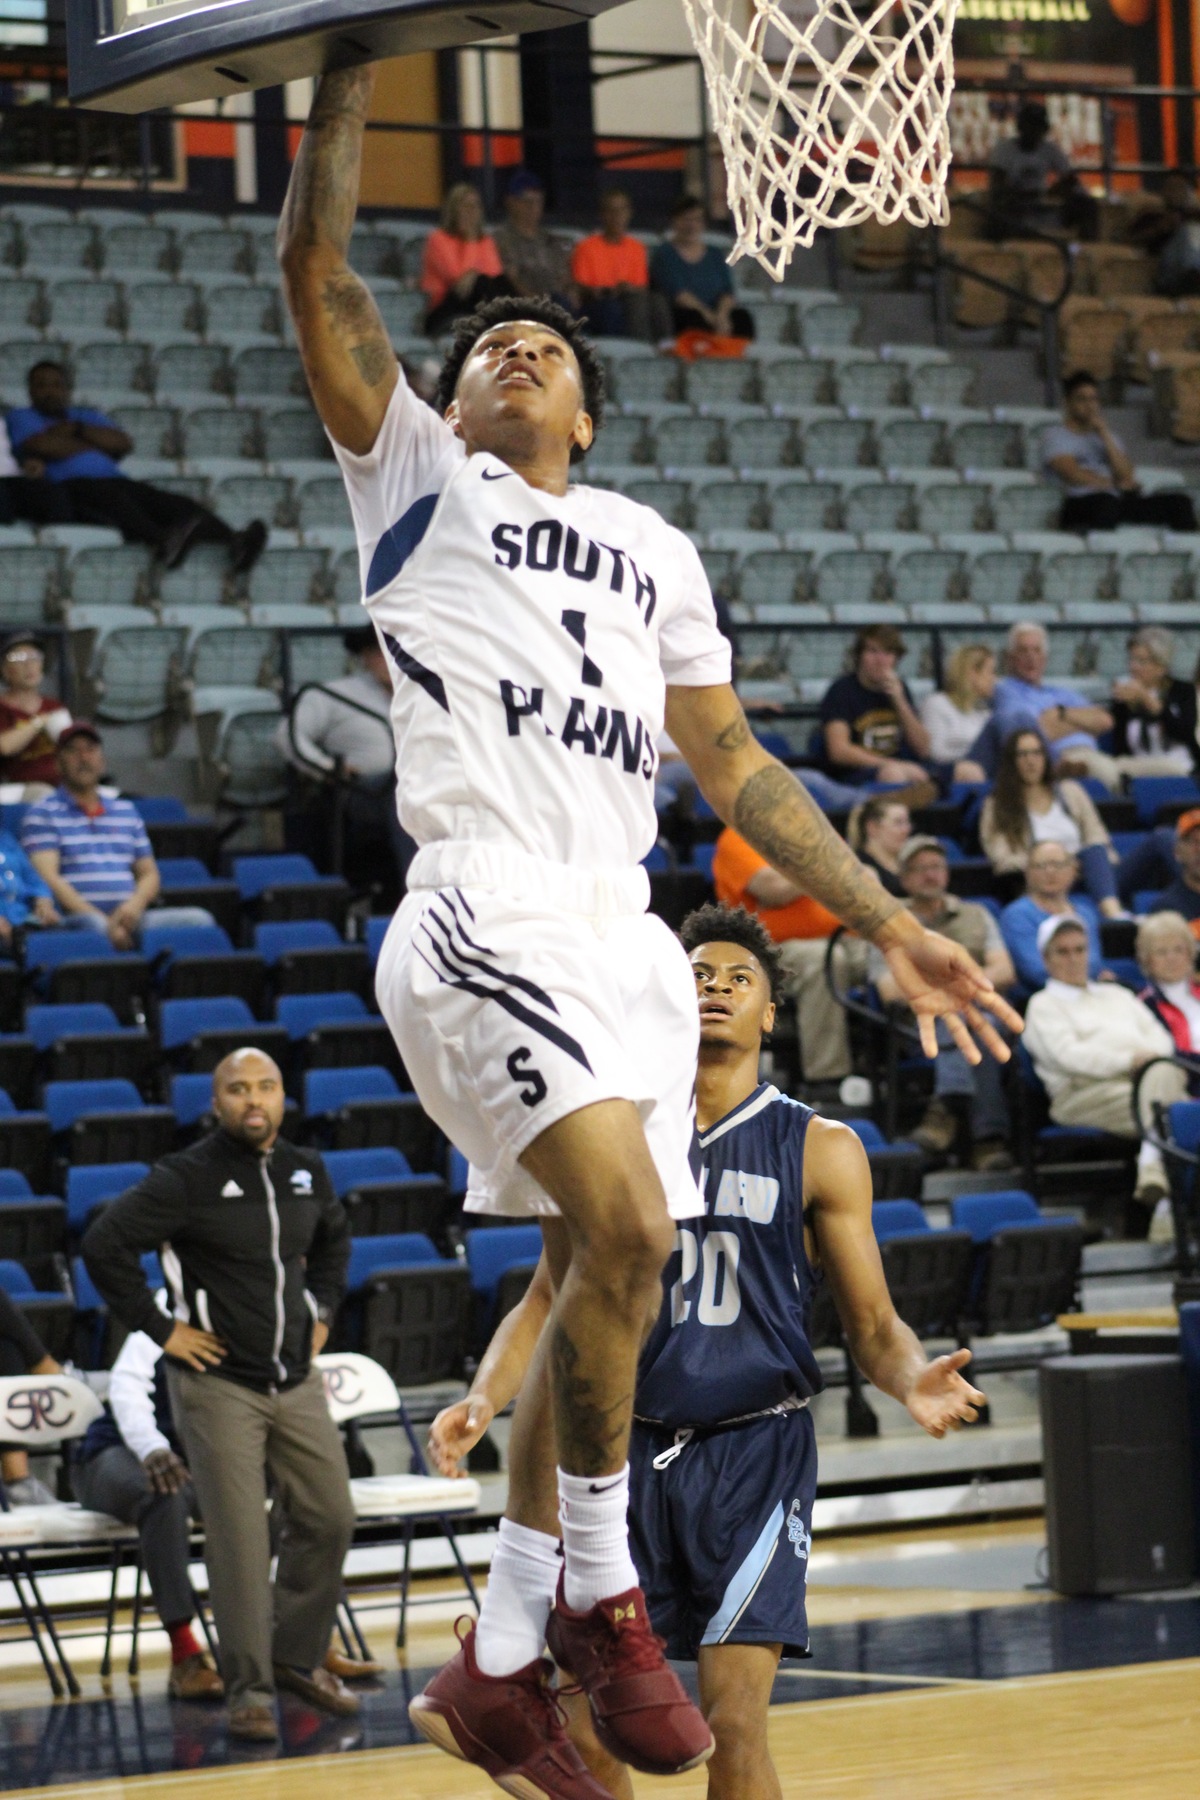 Brangers ties career-high with 38 points, Texans corral Cougars 104-78 on Saturday at the Texan Dome